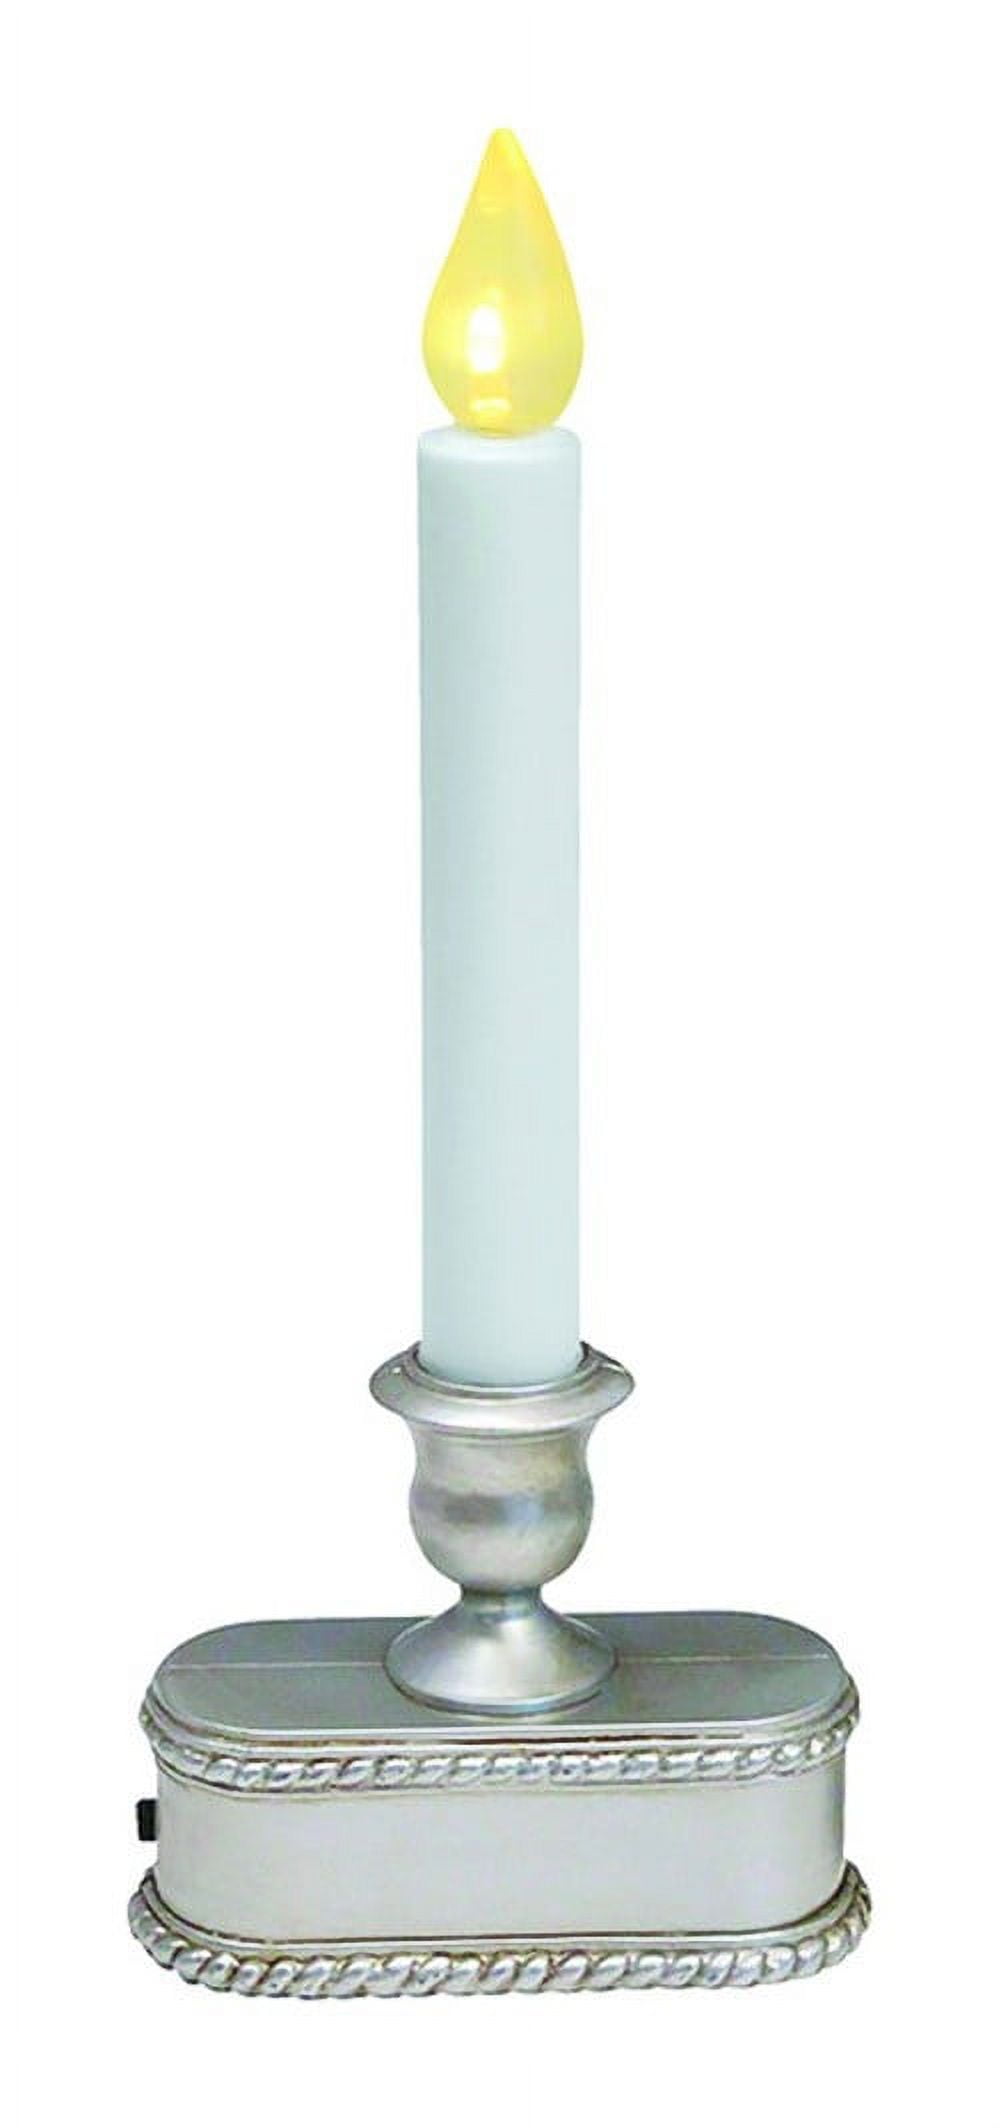 9737131 No Scent Brushed Silver Auto Sensor Candle, 9 In.